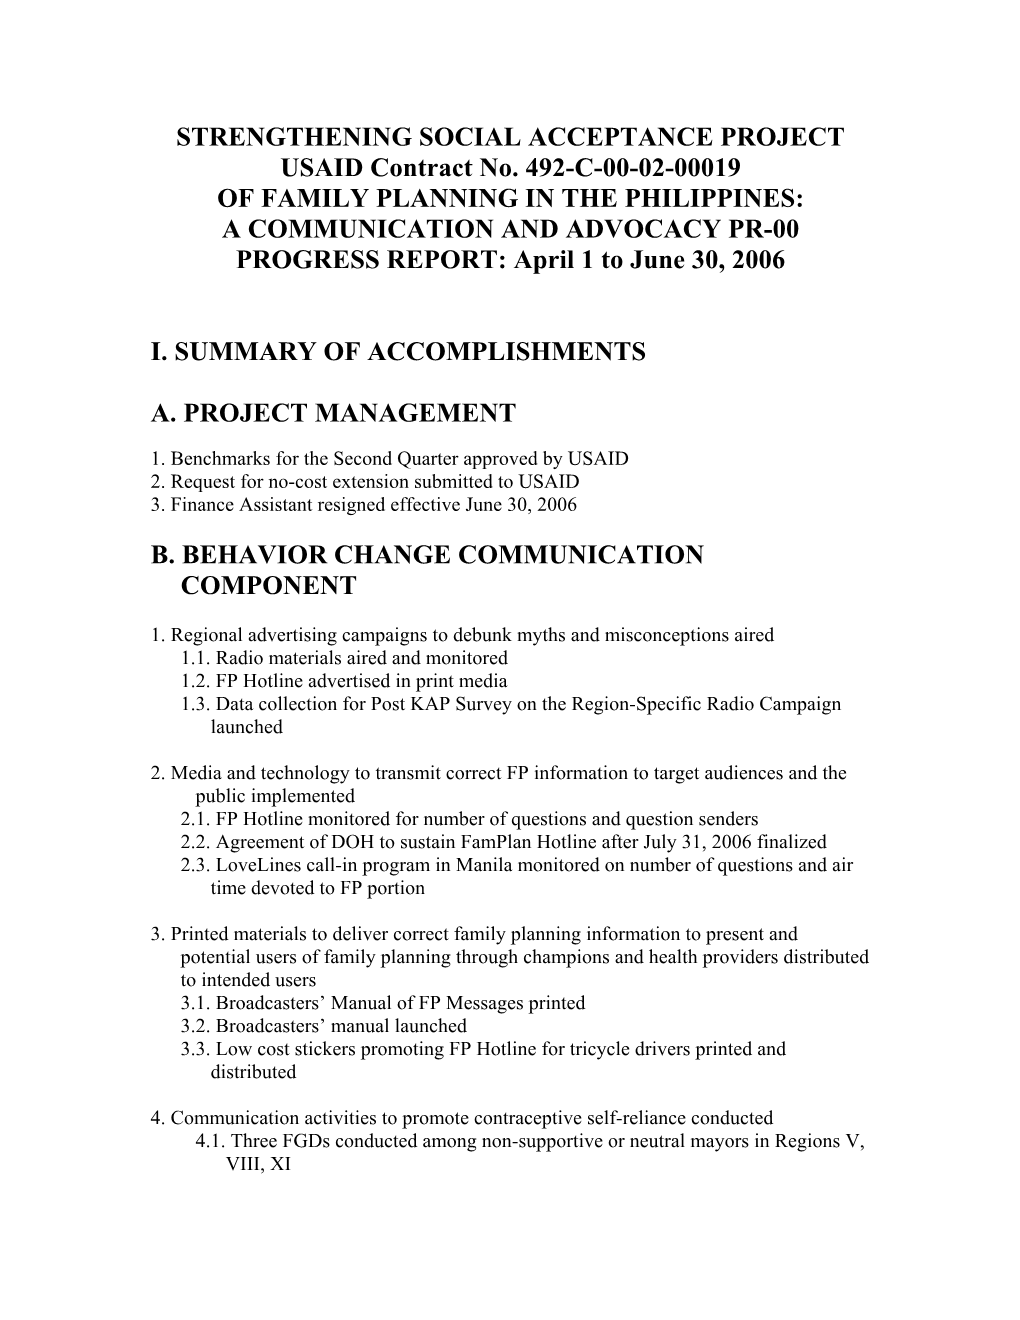 STRENGTHENING SOCIAL ACCEPTANCE PROJECT USAID Contract No. 492-C-00-02-00019 of FAMILY PLANNING in the PHILIPPINES: a COMMUNICAT